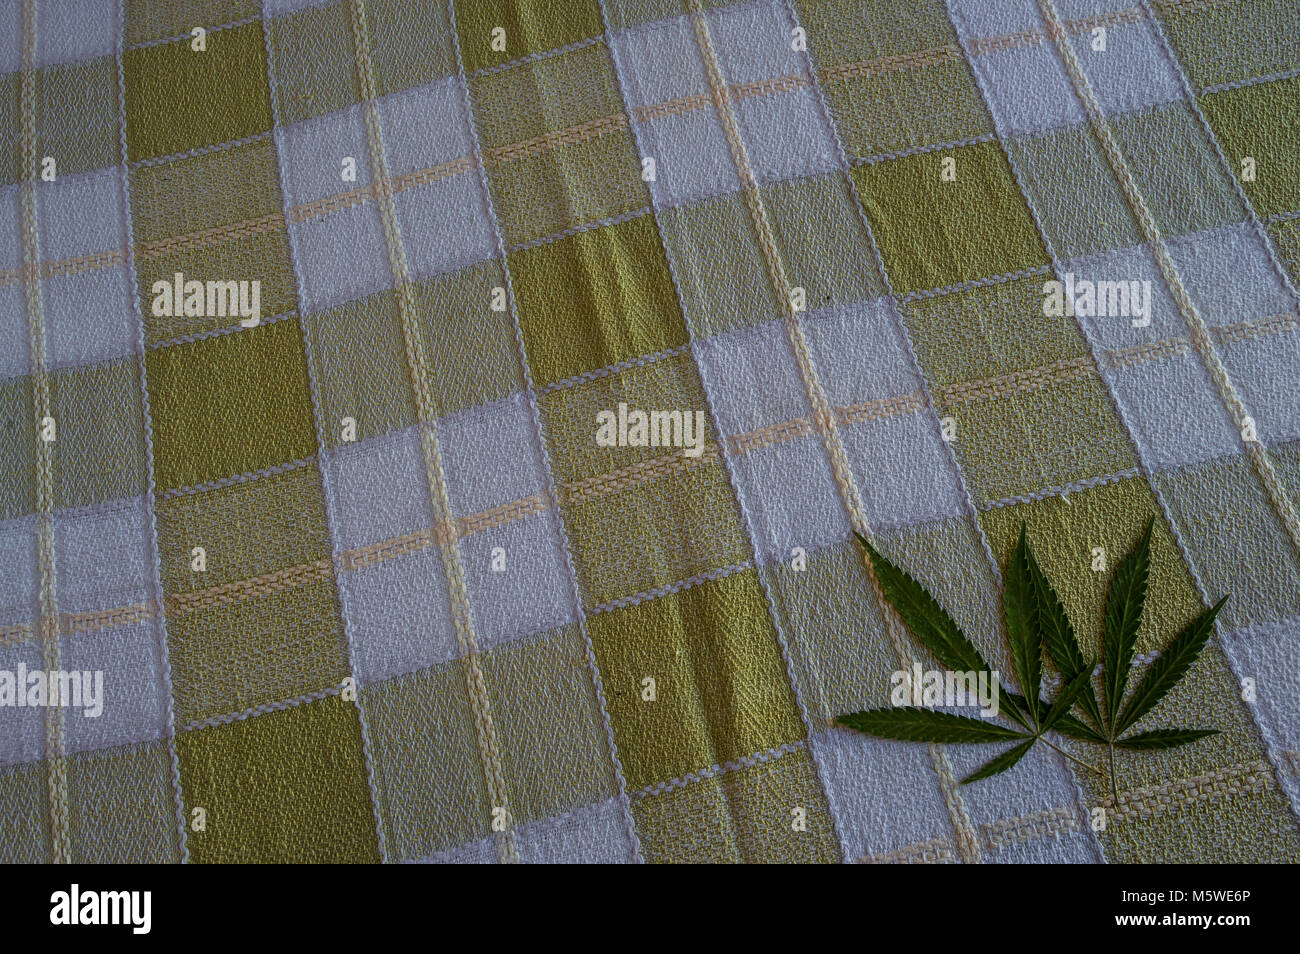 Pair of beautiful green marijuana leaves in checkered tablecloth of a picnic. Relaxing and natural background of a yellow fabric with space to add tex Stock Photo